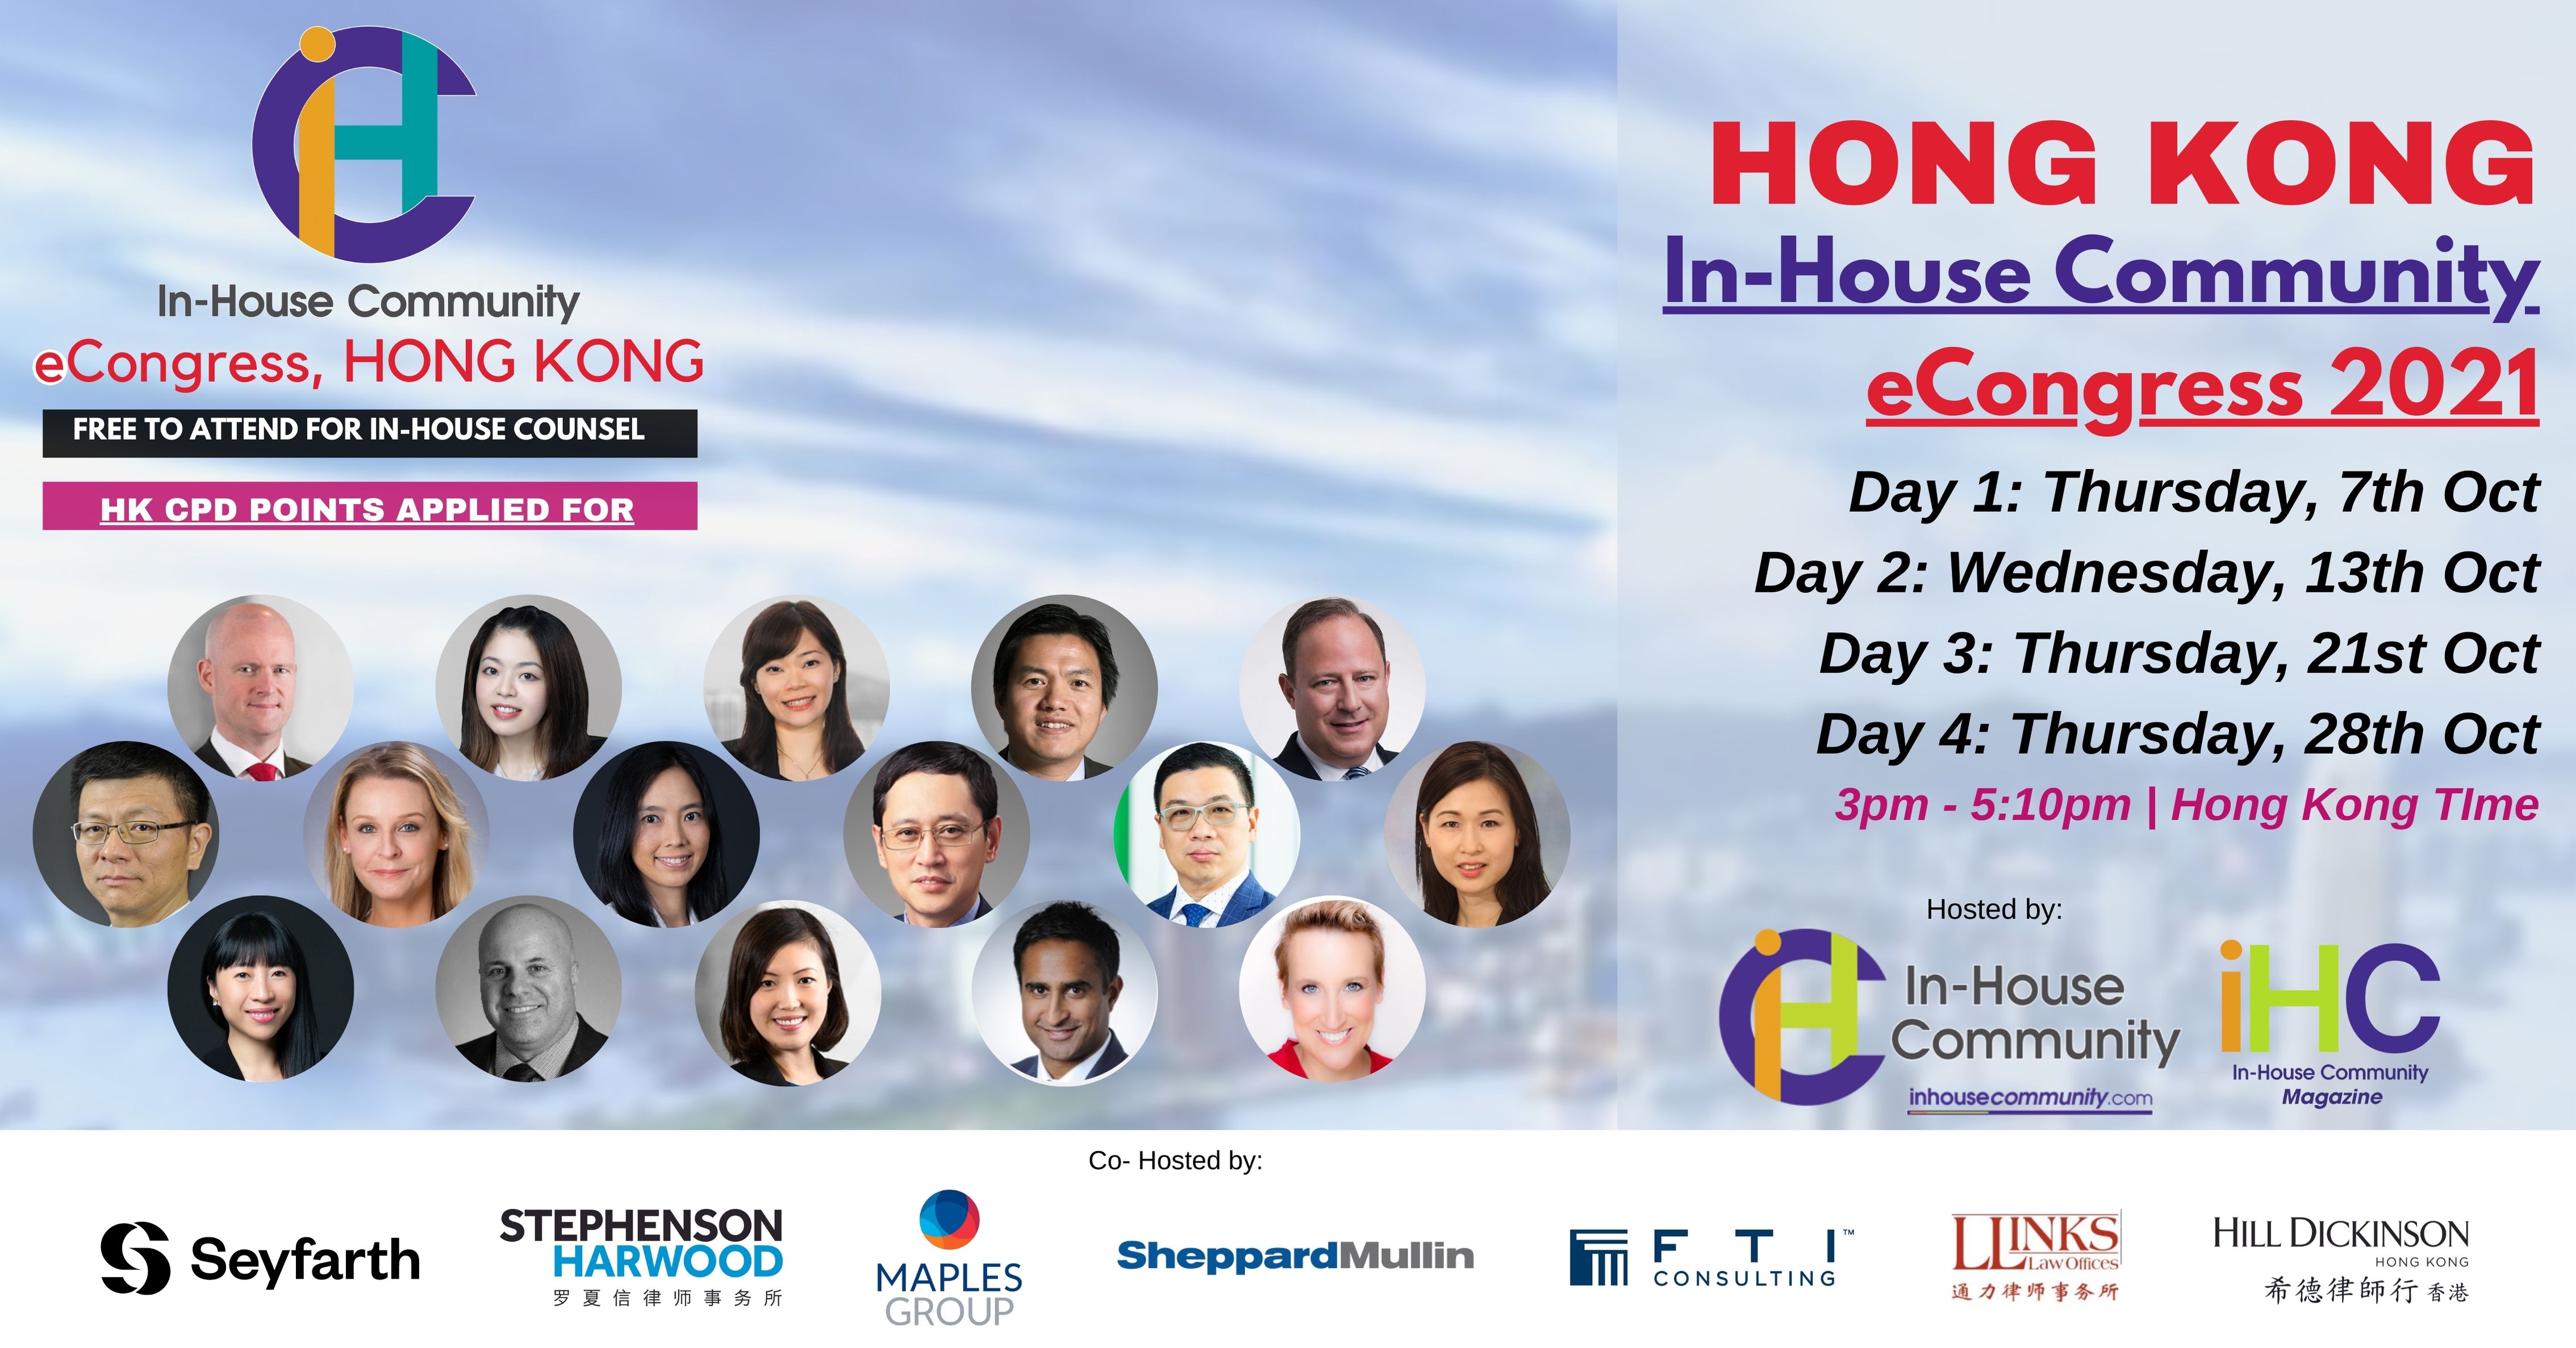 Hong Kong In-House Community Congress 2021 - Featured Image